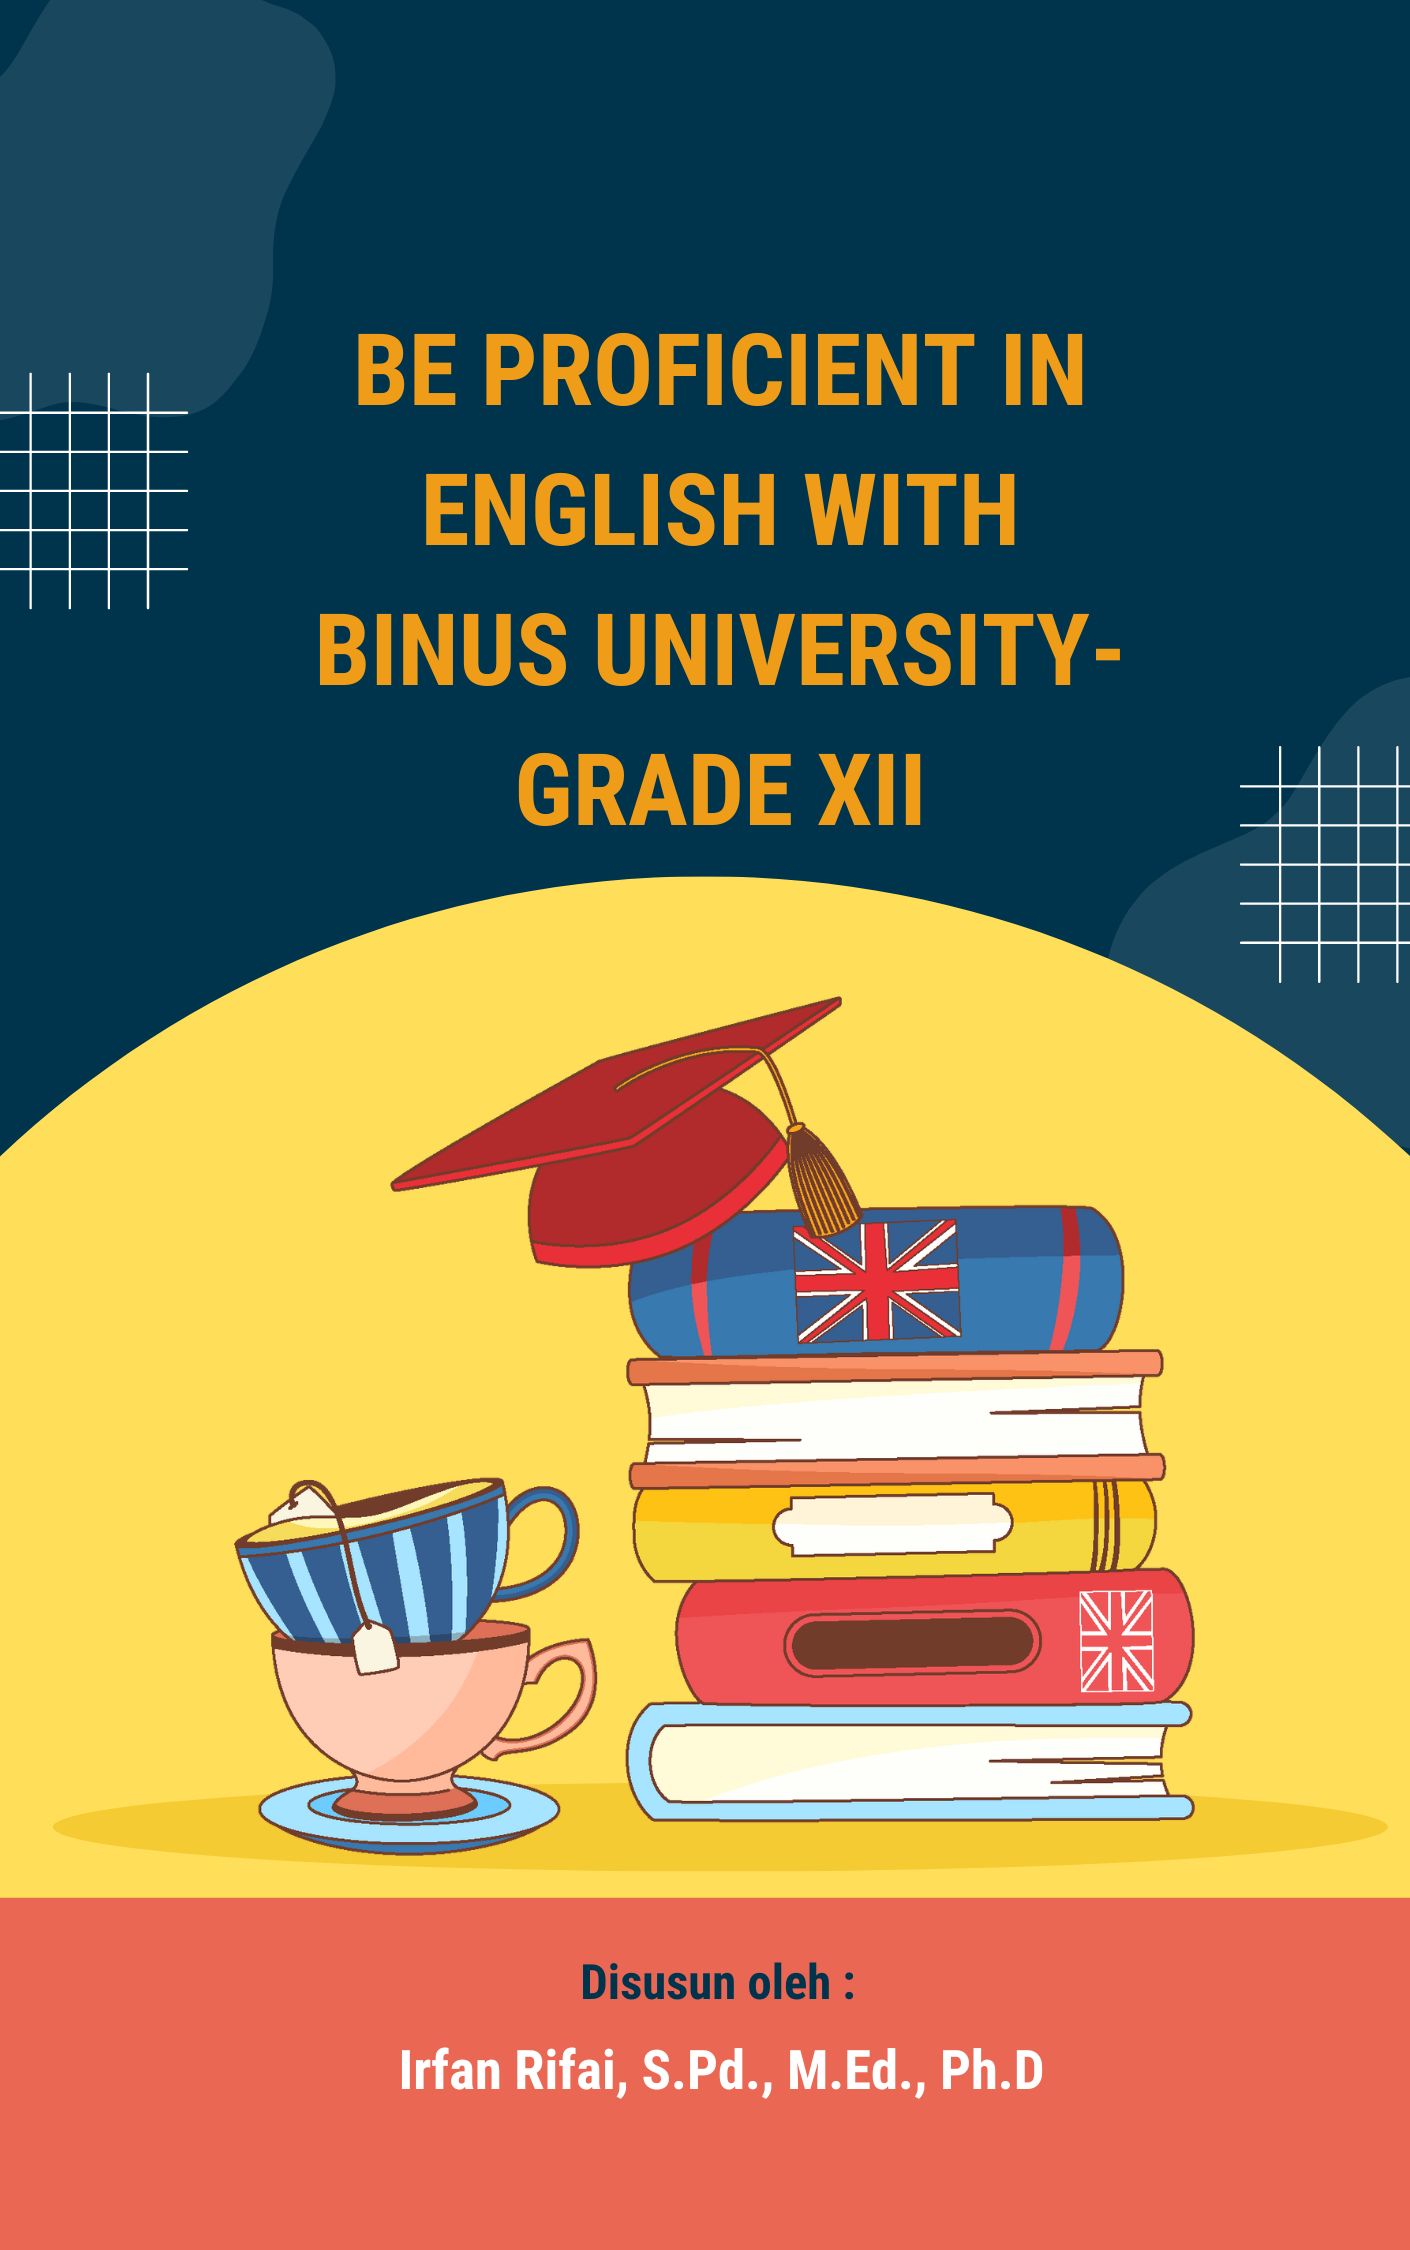 Be Proficient in English with BINUS University – Grade XII